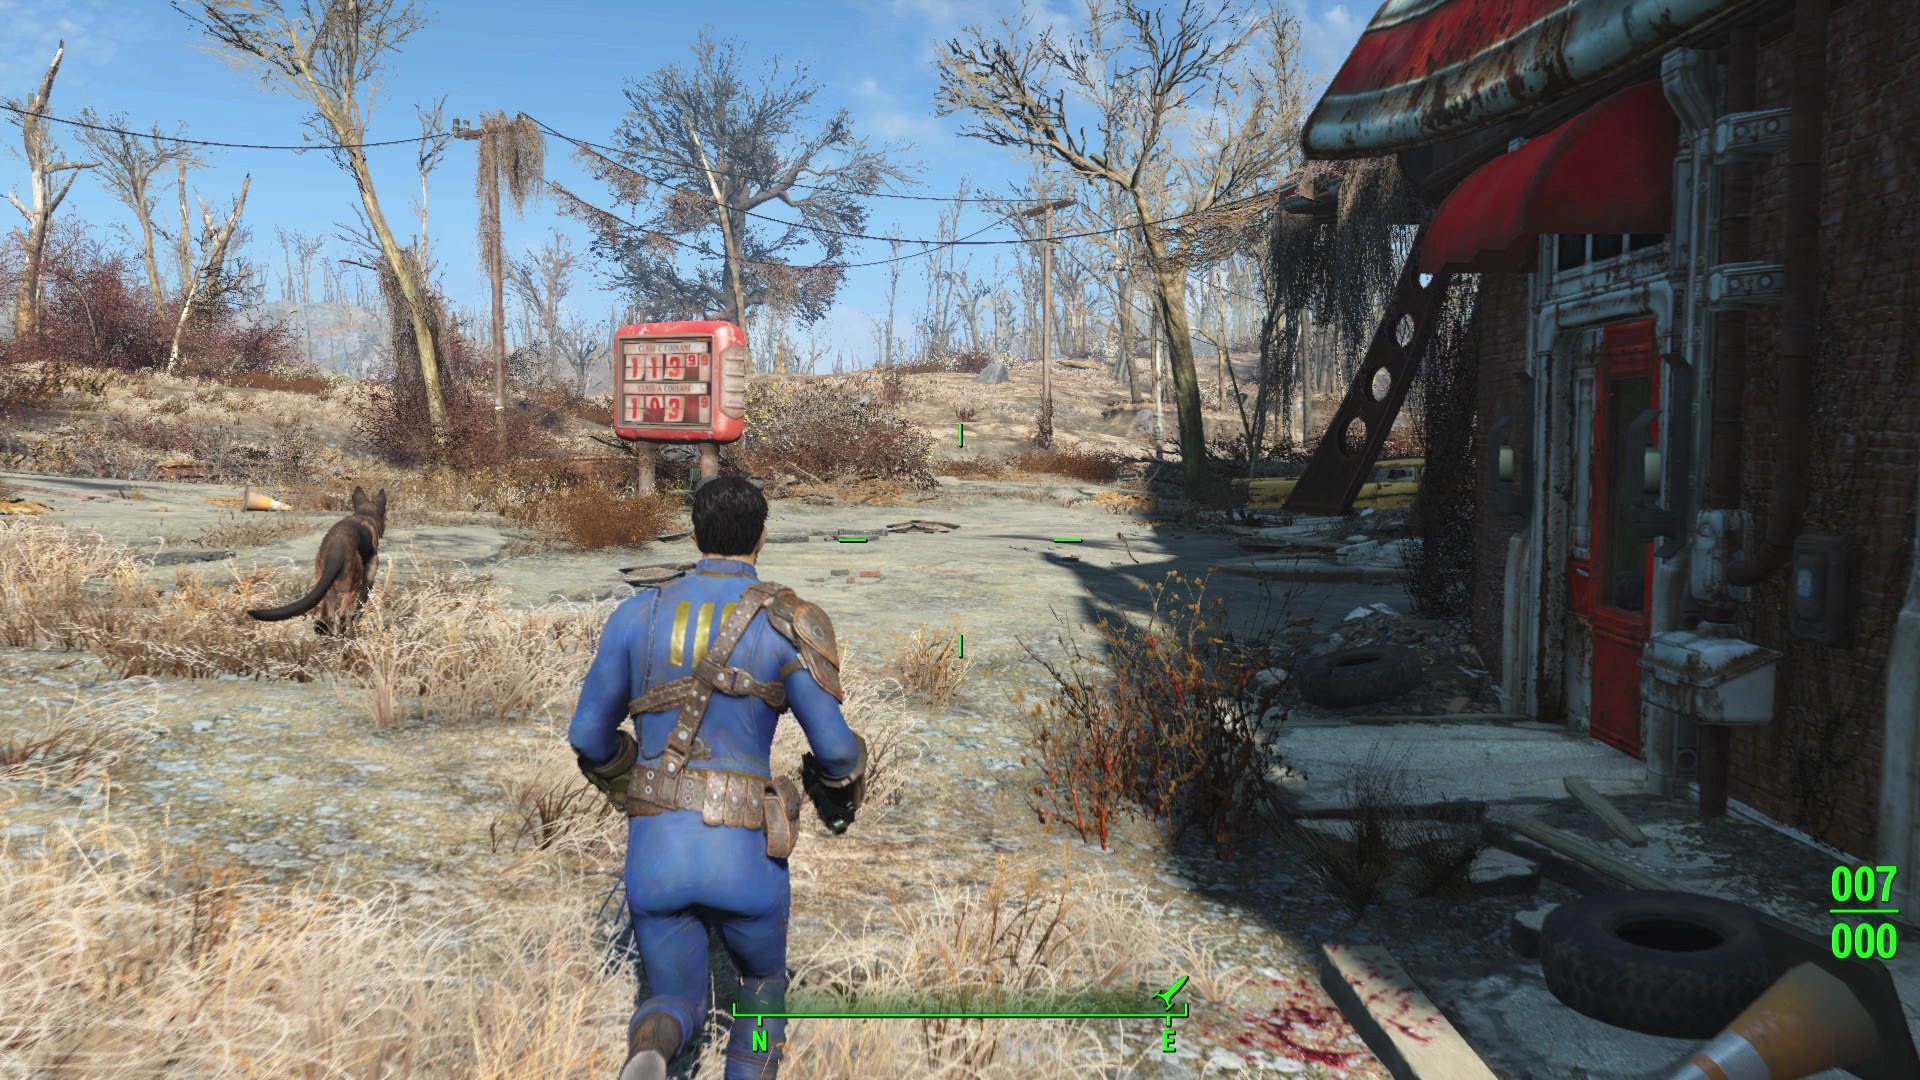 Fallout-4-Graphics-Will-Enhance-Immersion-Says-Todd-Howard-484671-11.jpg